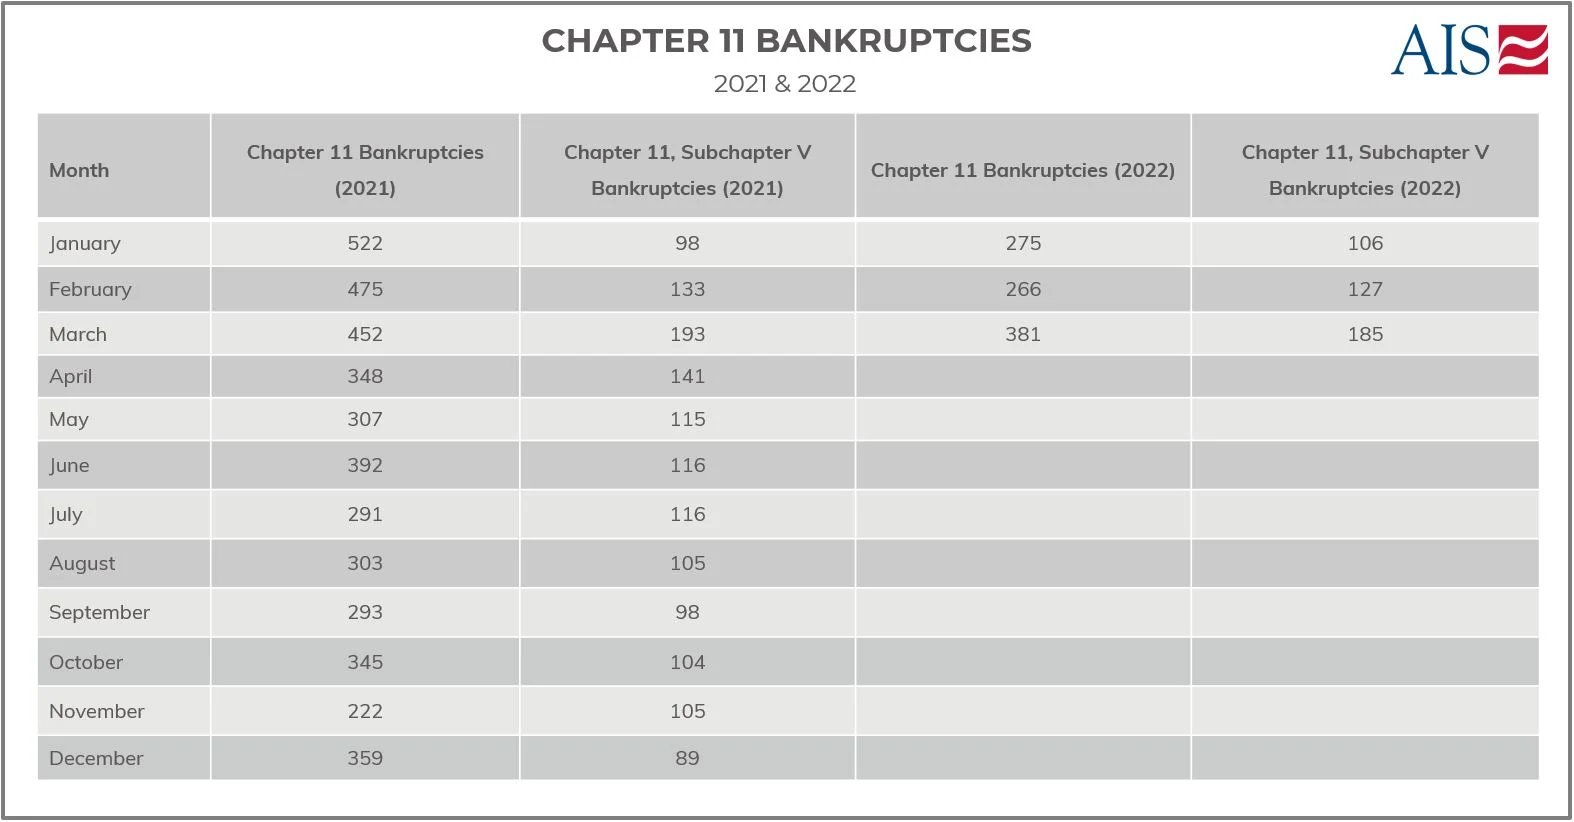 MARCH 2022_CHAPTER 11 BANKRUPTCIES (TABLE)